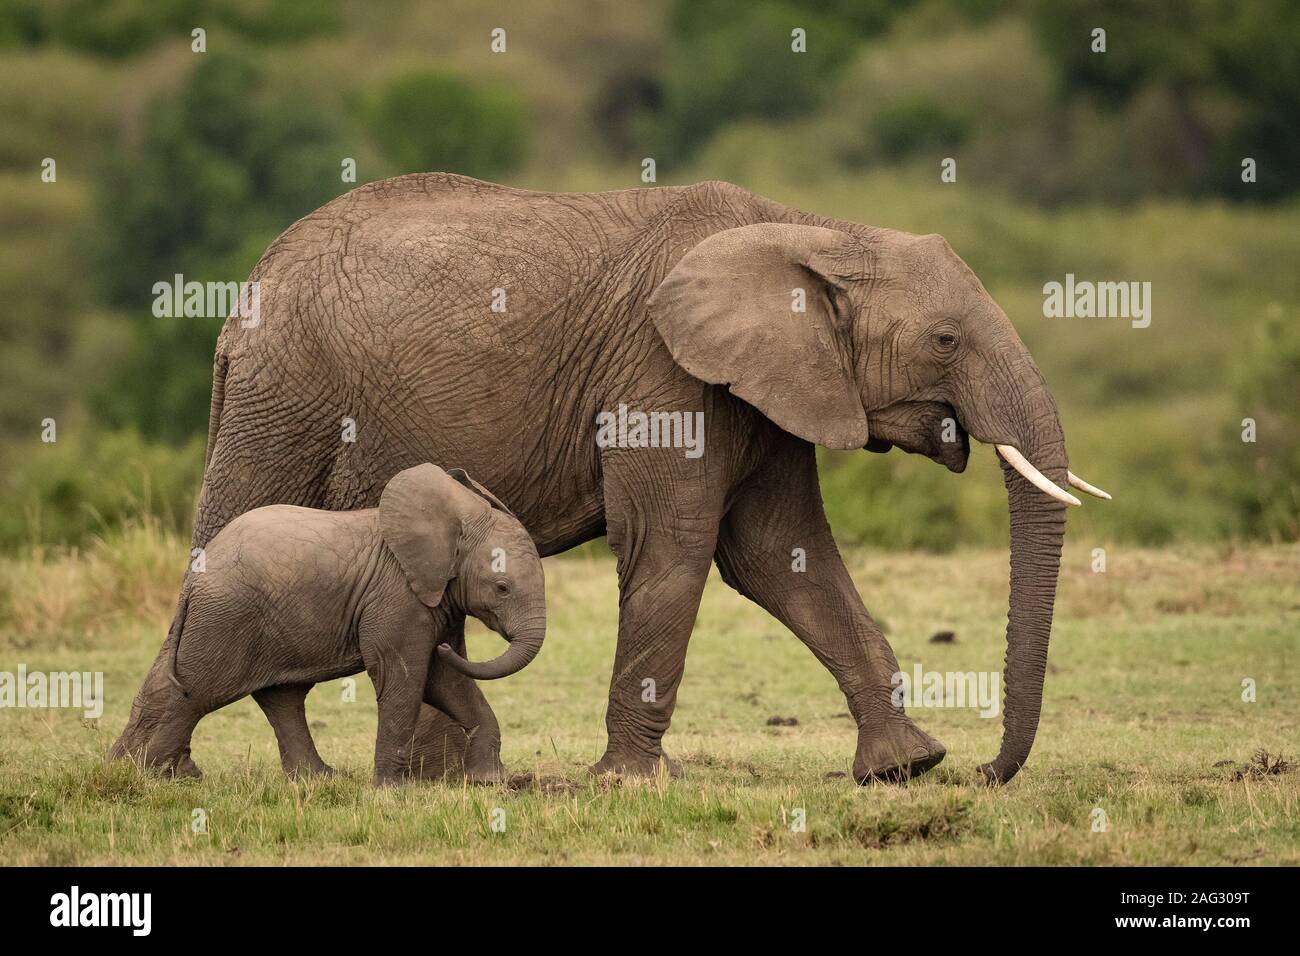 Closeup Shot Of A Baby Elephant Walking Near Its Mother With A Blurred Background Stock Photo Alamy